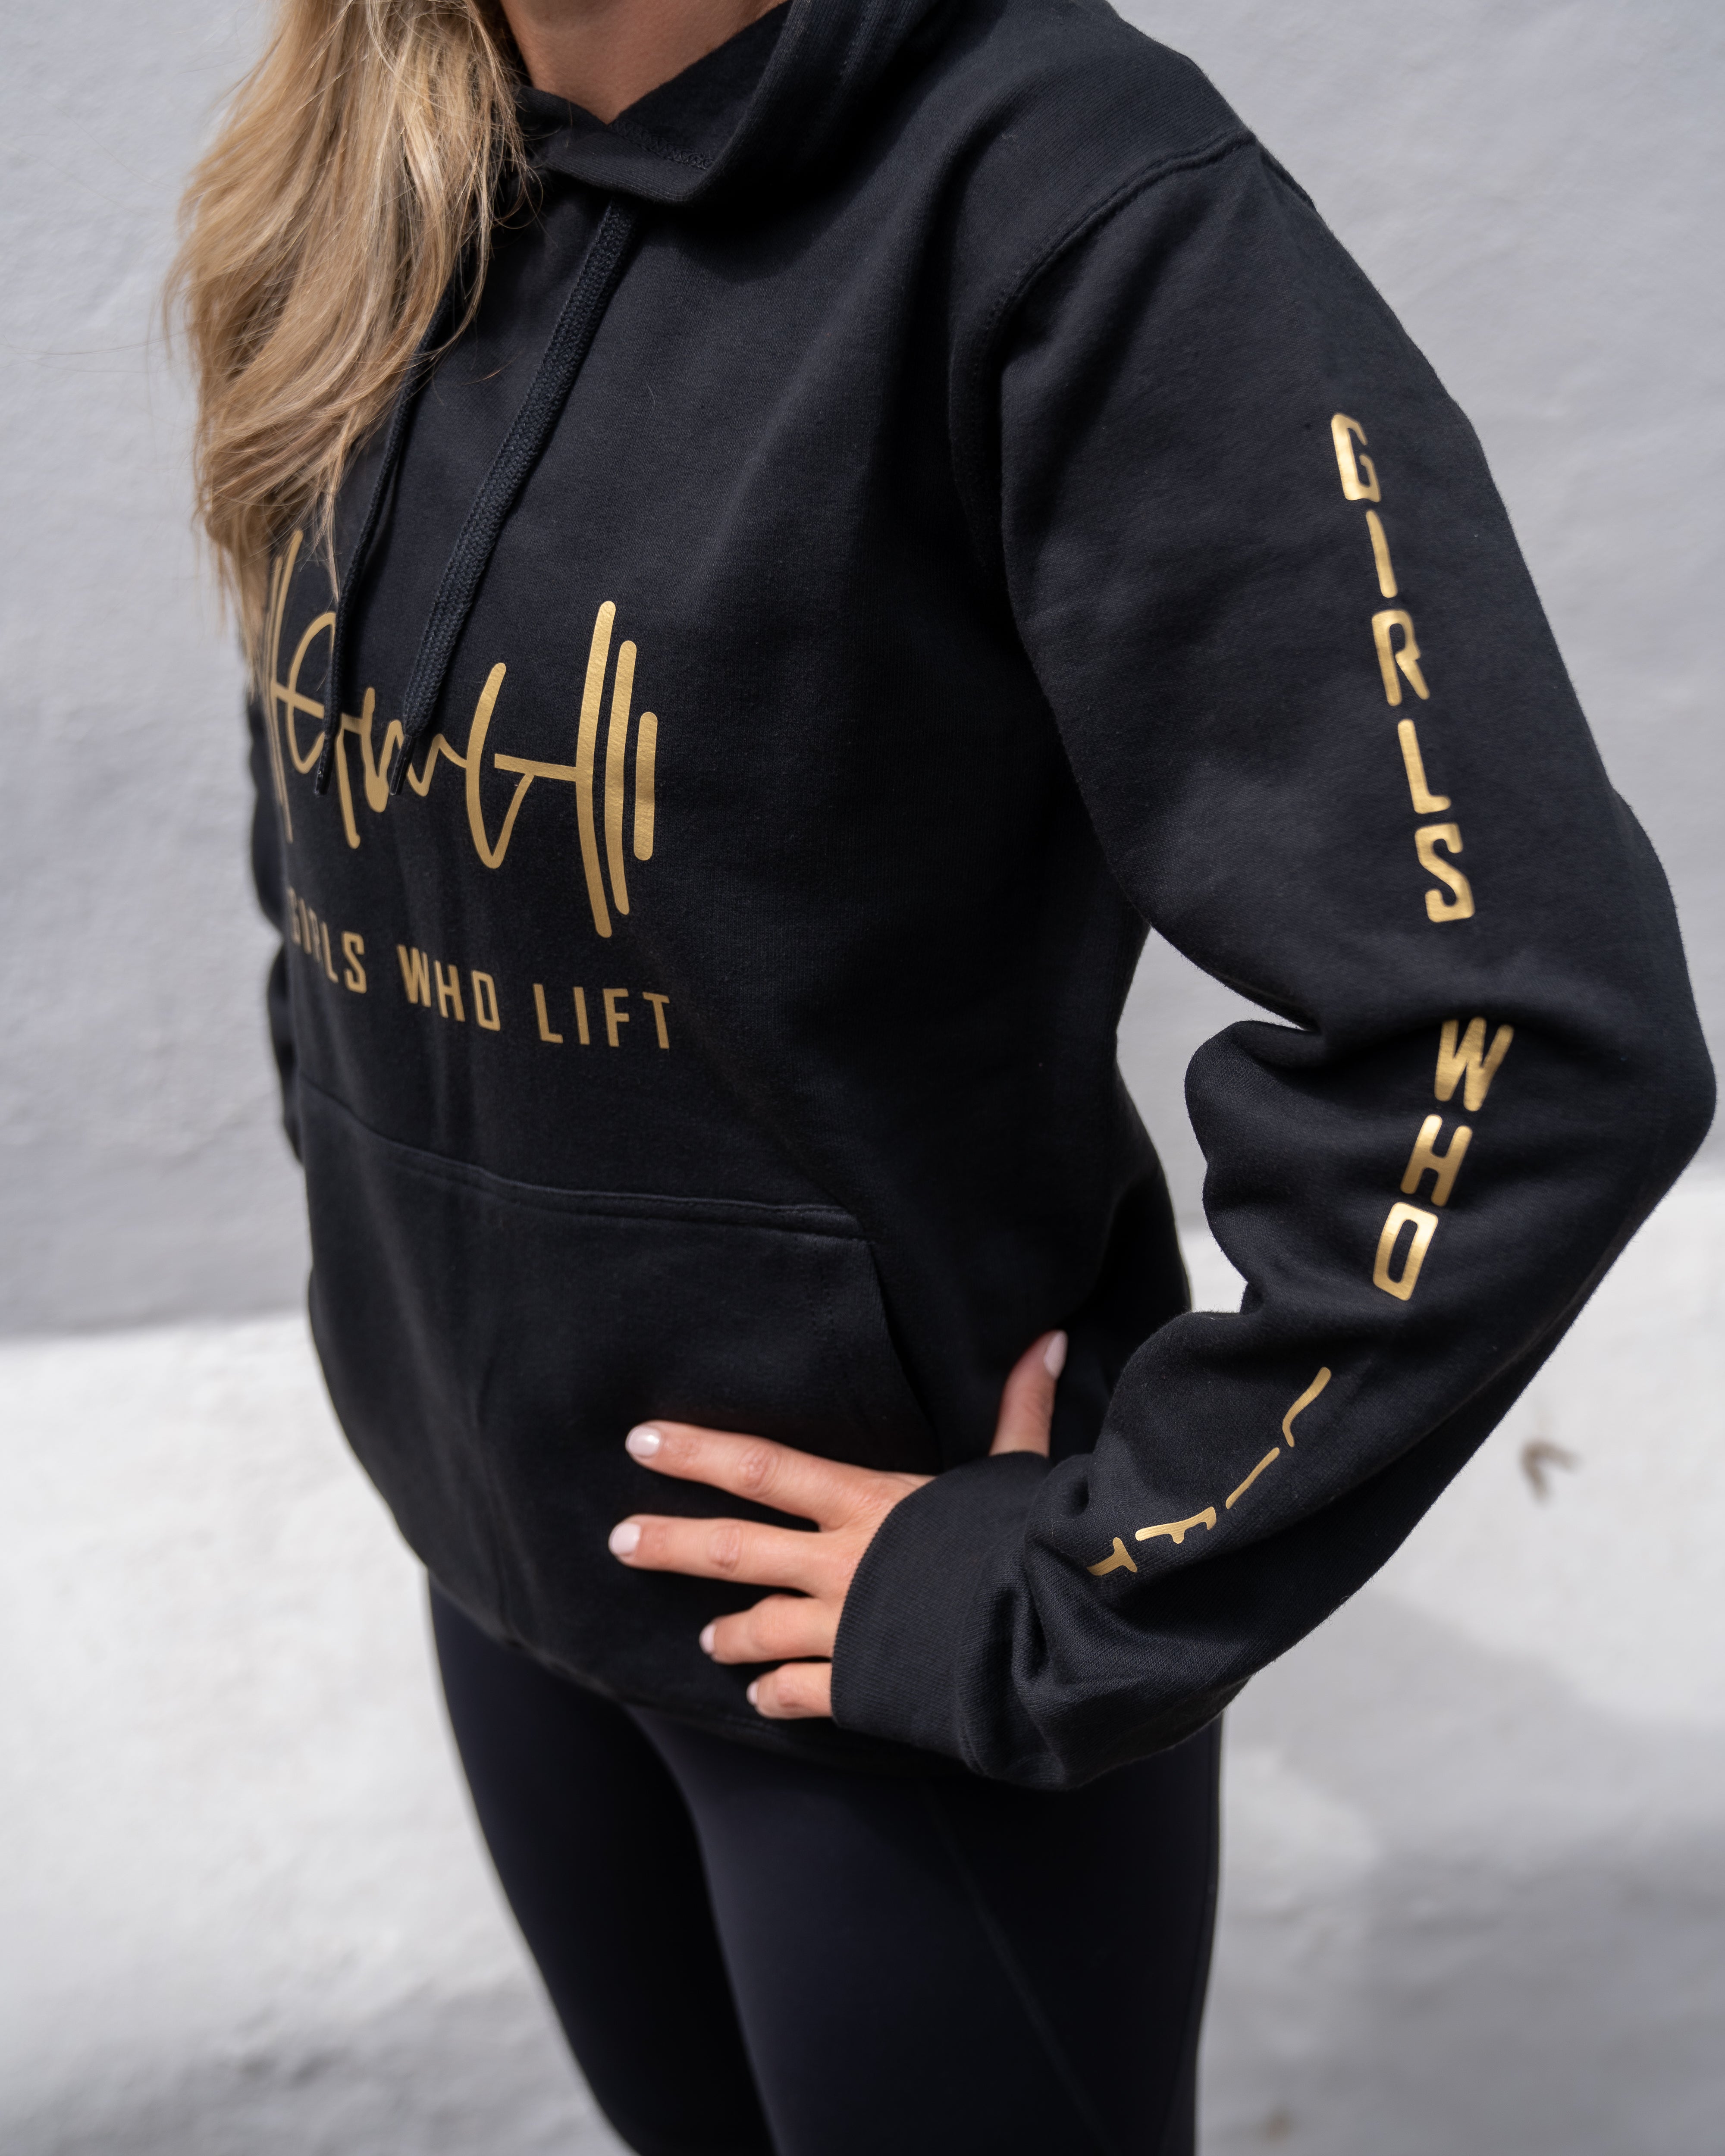 Girls Who Lift hoodie with gold print close up